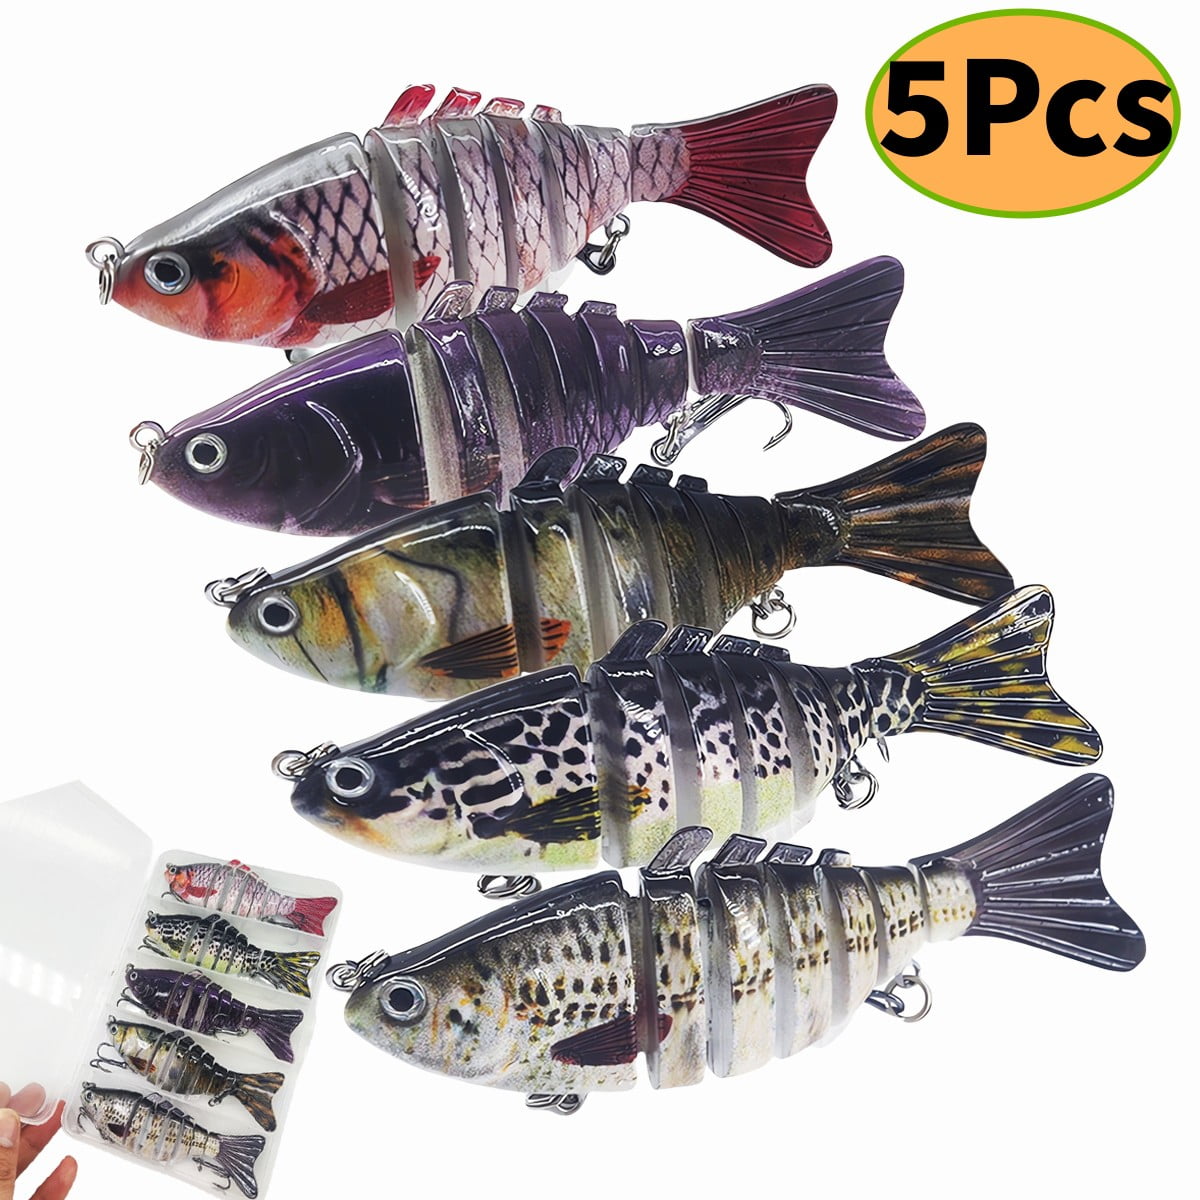 THKFISH Soft Plastic Fishing Lures Plastic Worms for Fishing Lures for Bass  Bellow Stick Baits Small Fishing Lures 4.33 (1/4oz) Color 2-6PCS 